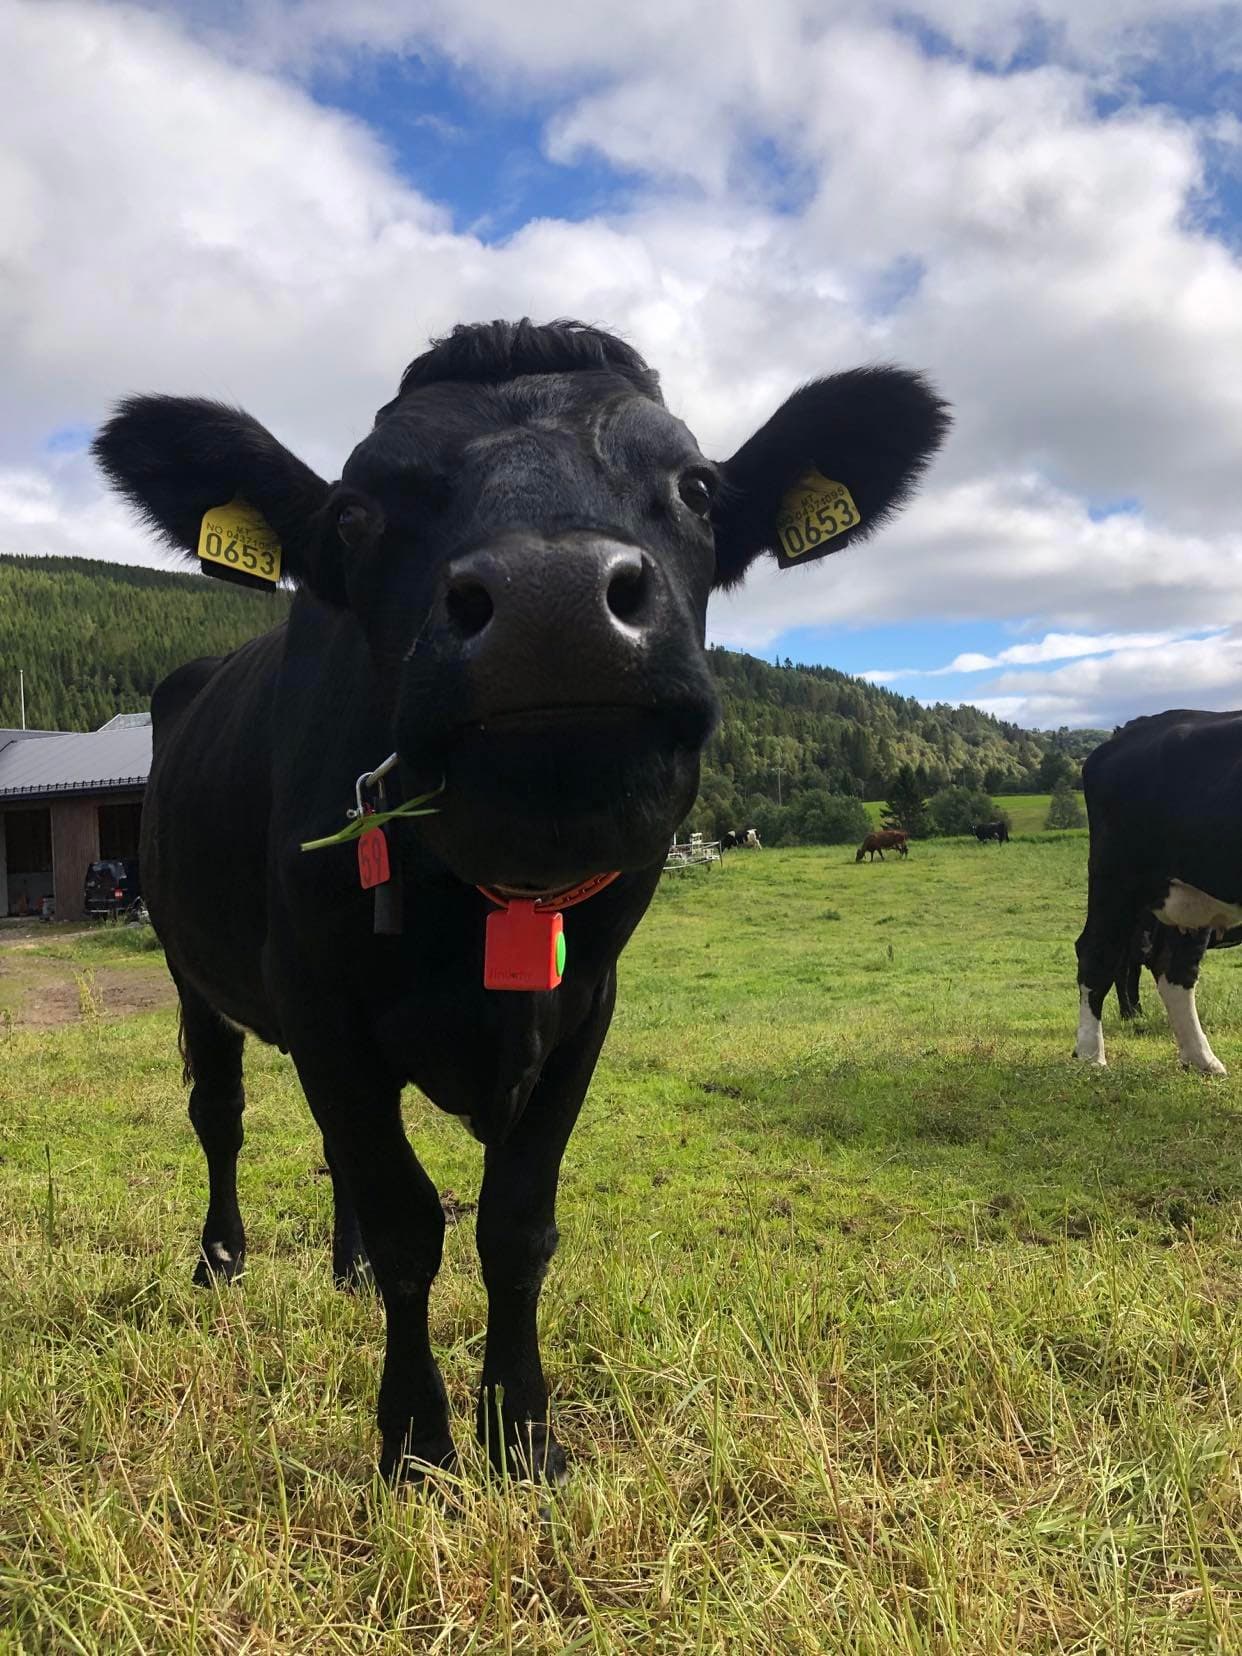 Cow with red e-bell